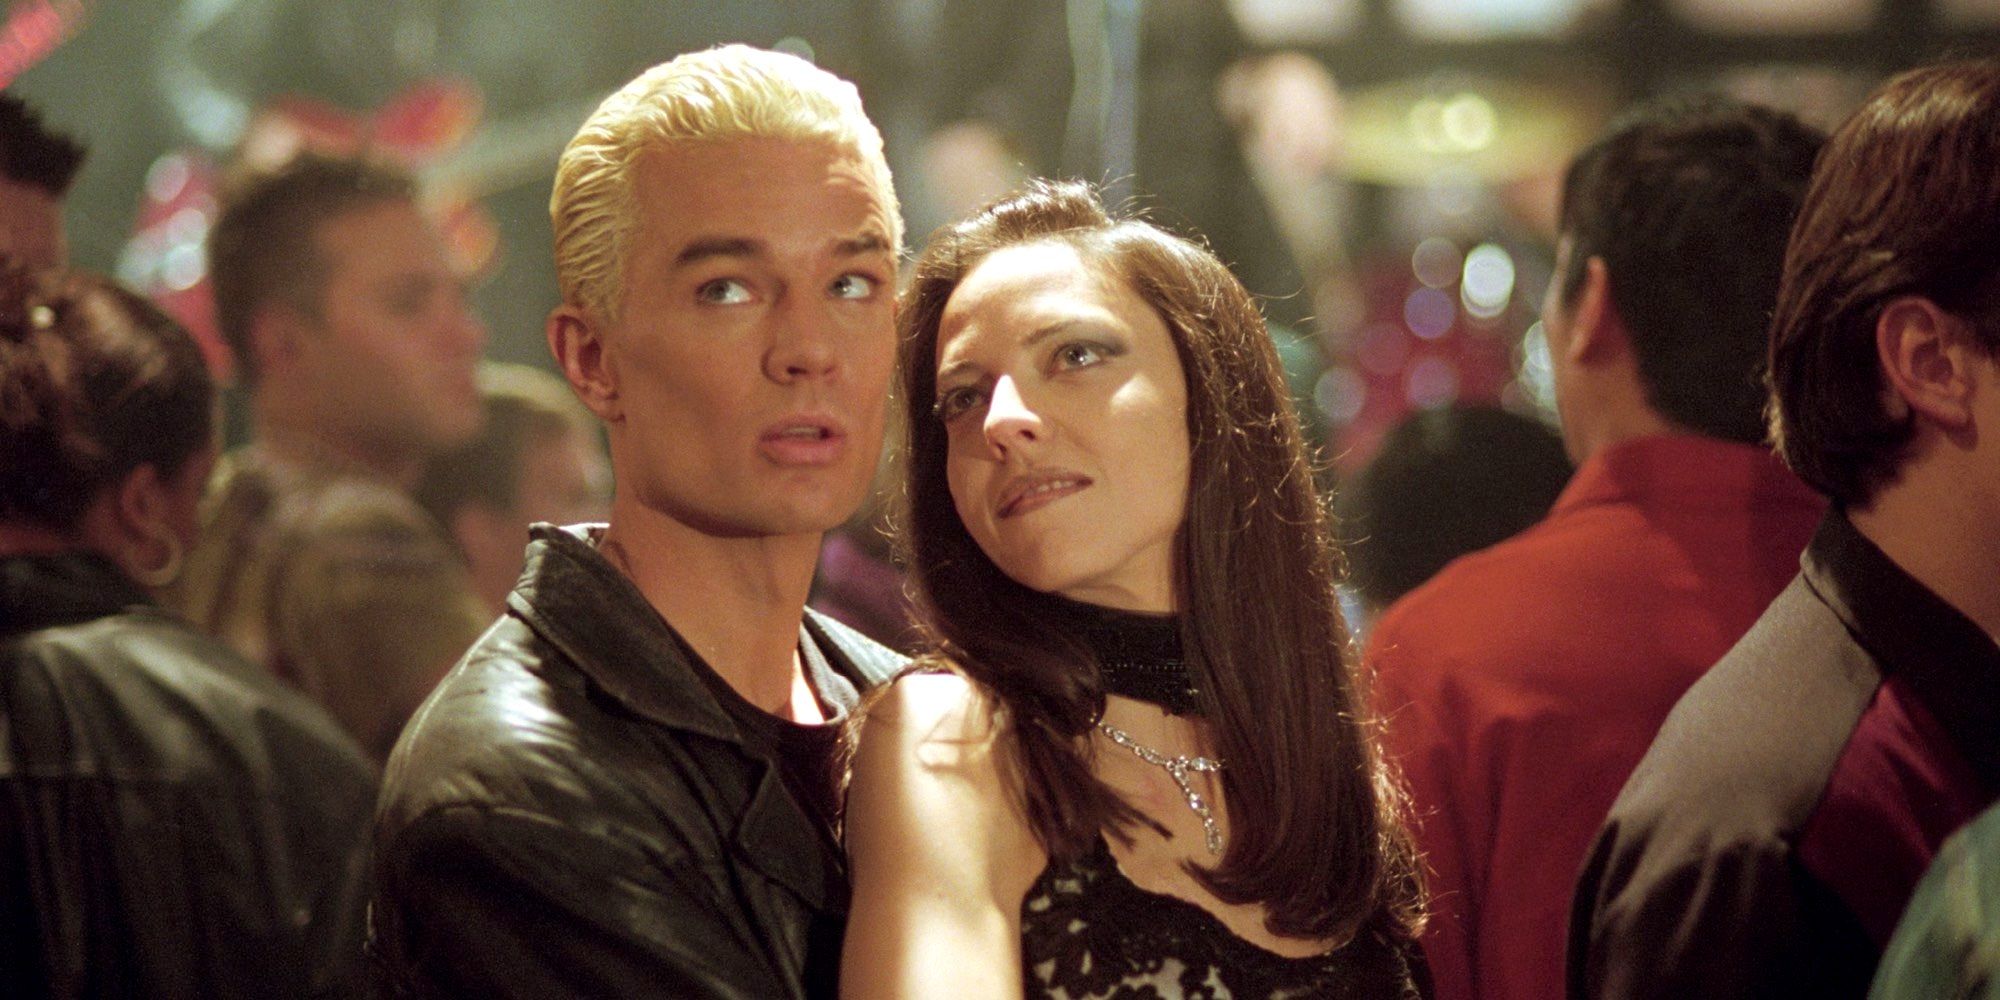 Spike Actor Will Only Return For Buffy Reunion In Vampire Form